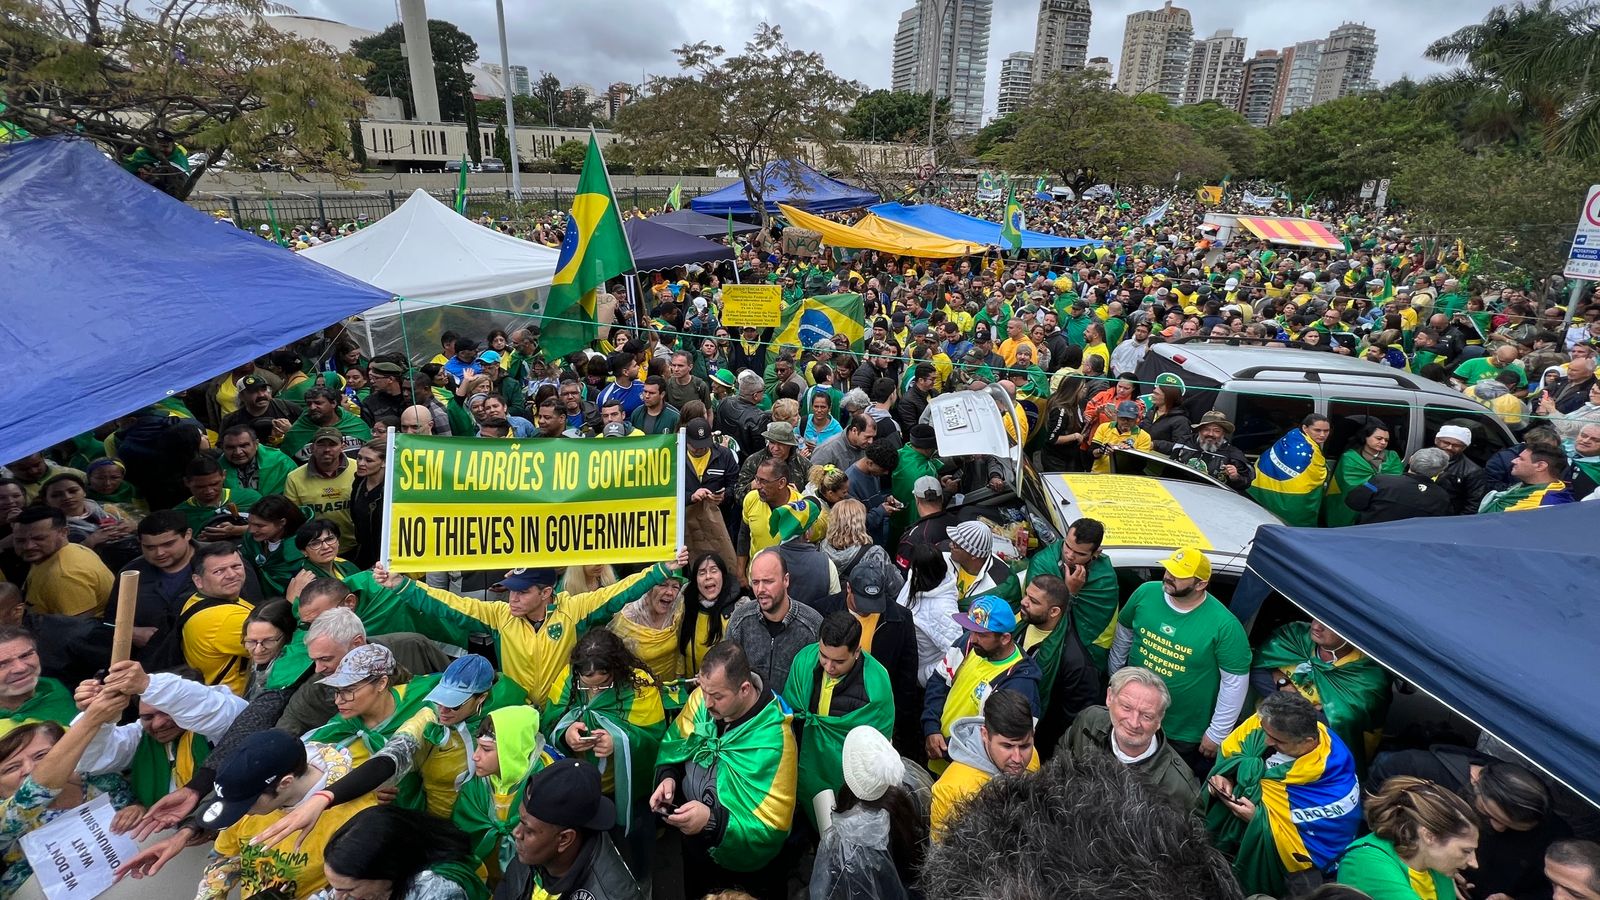 'He cannot take power': Bolsonaro's seething supporters refuse to accept Brazil's election result